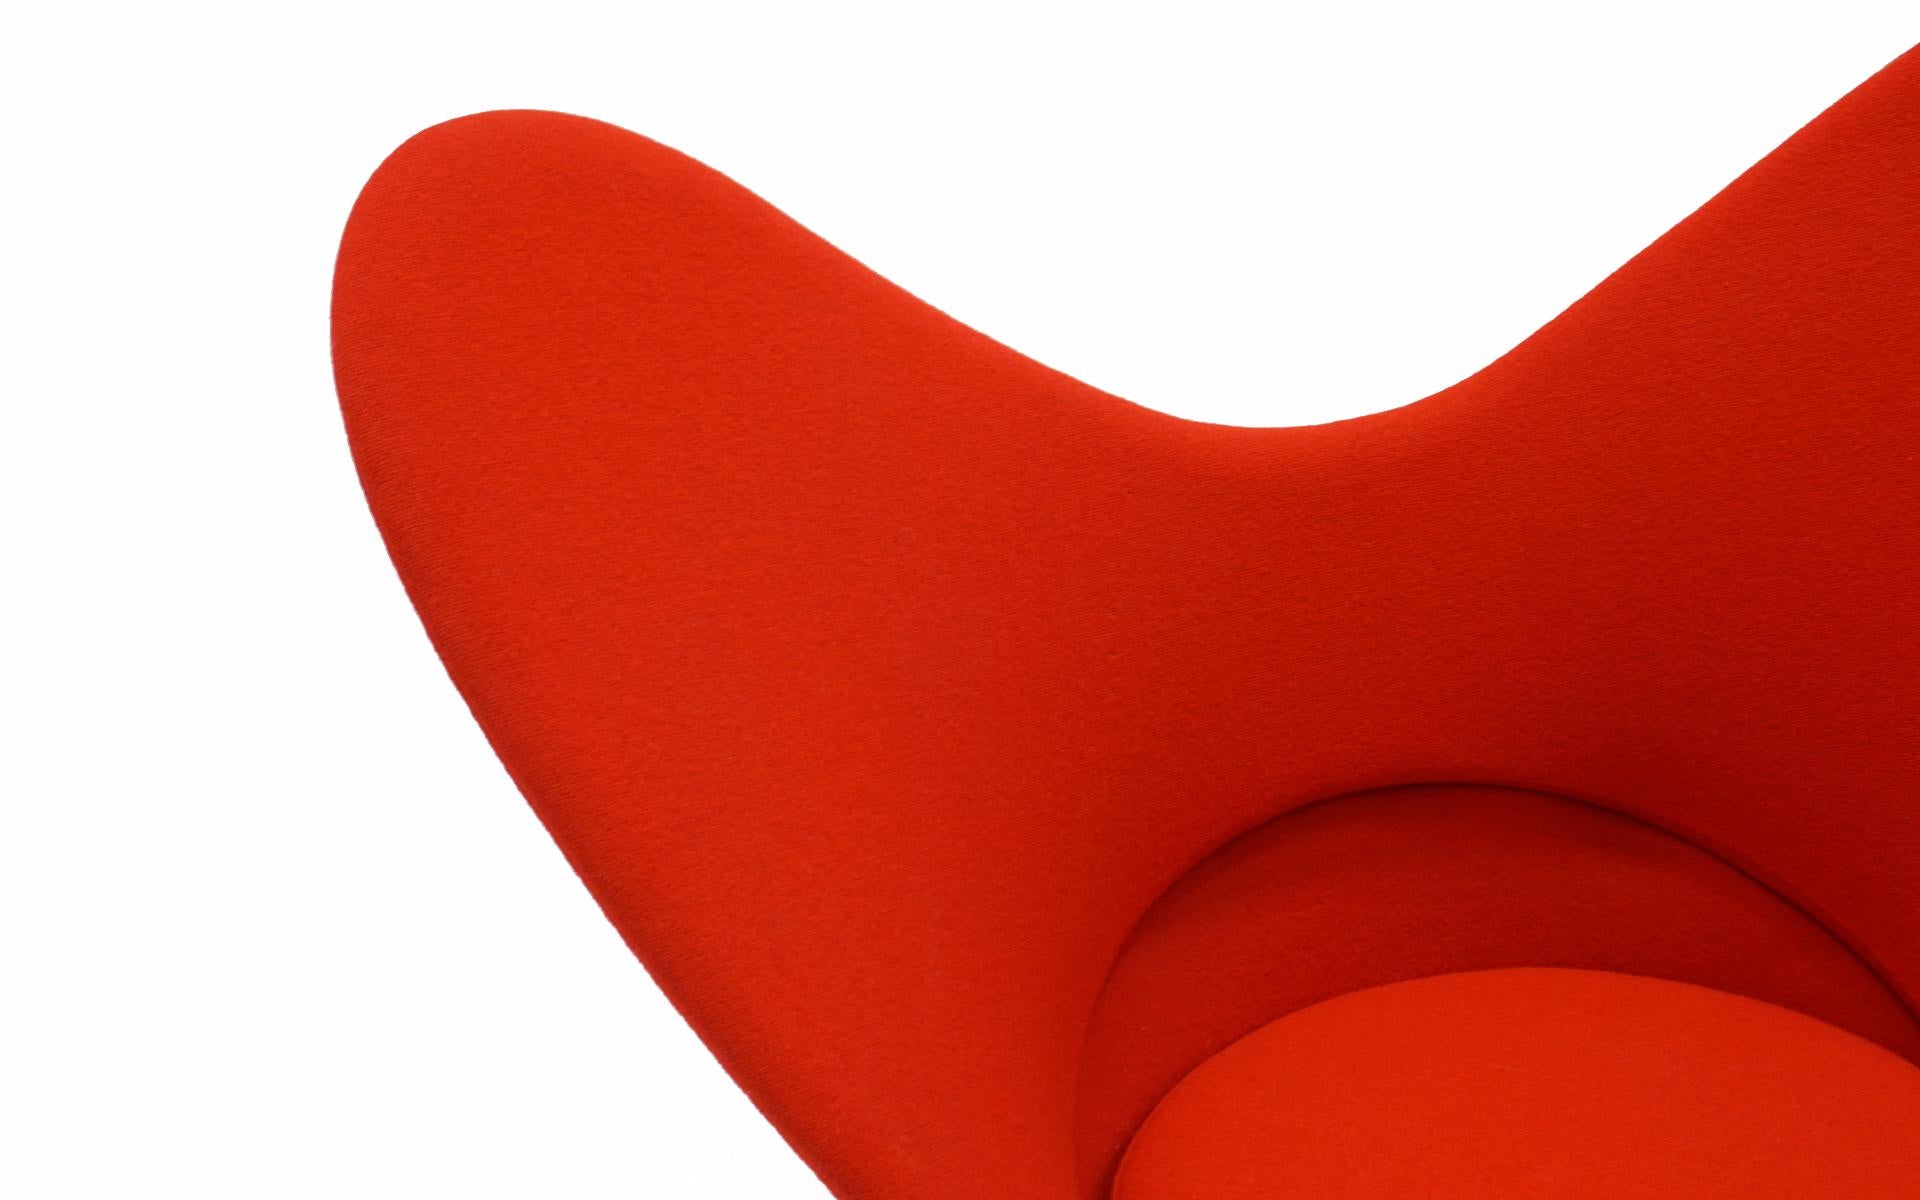 Mid-Century Modern Red Heart Chair by Verner Panton for Vitra, Great Condition